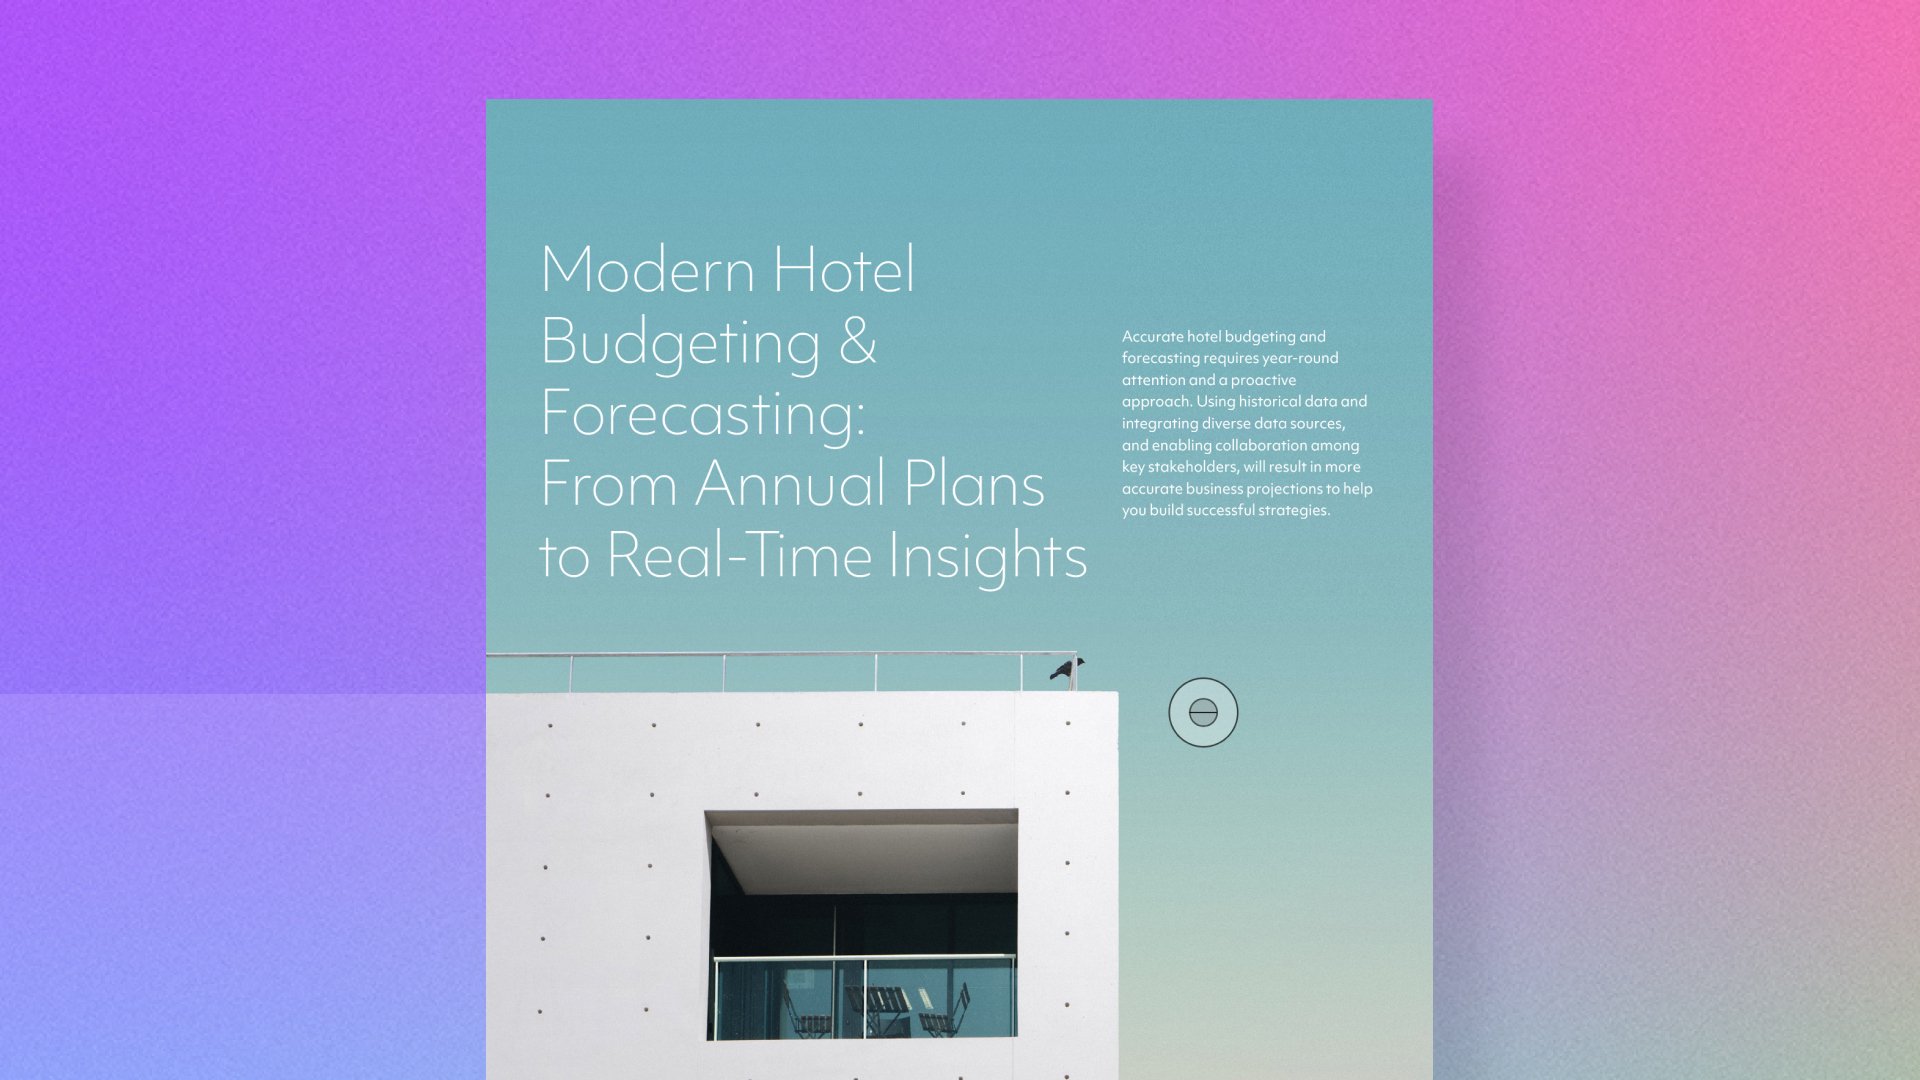 Modern Hotel Budgeting & Forecasting: From Annual Plans to Real-Time Insights